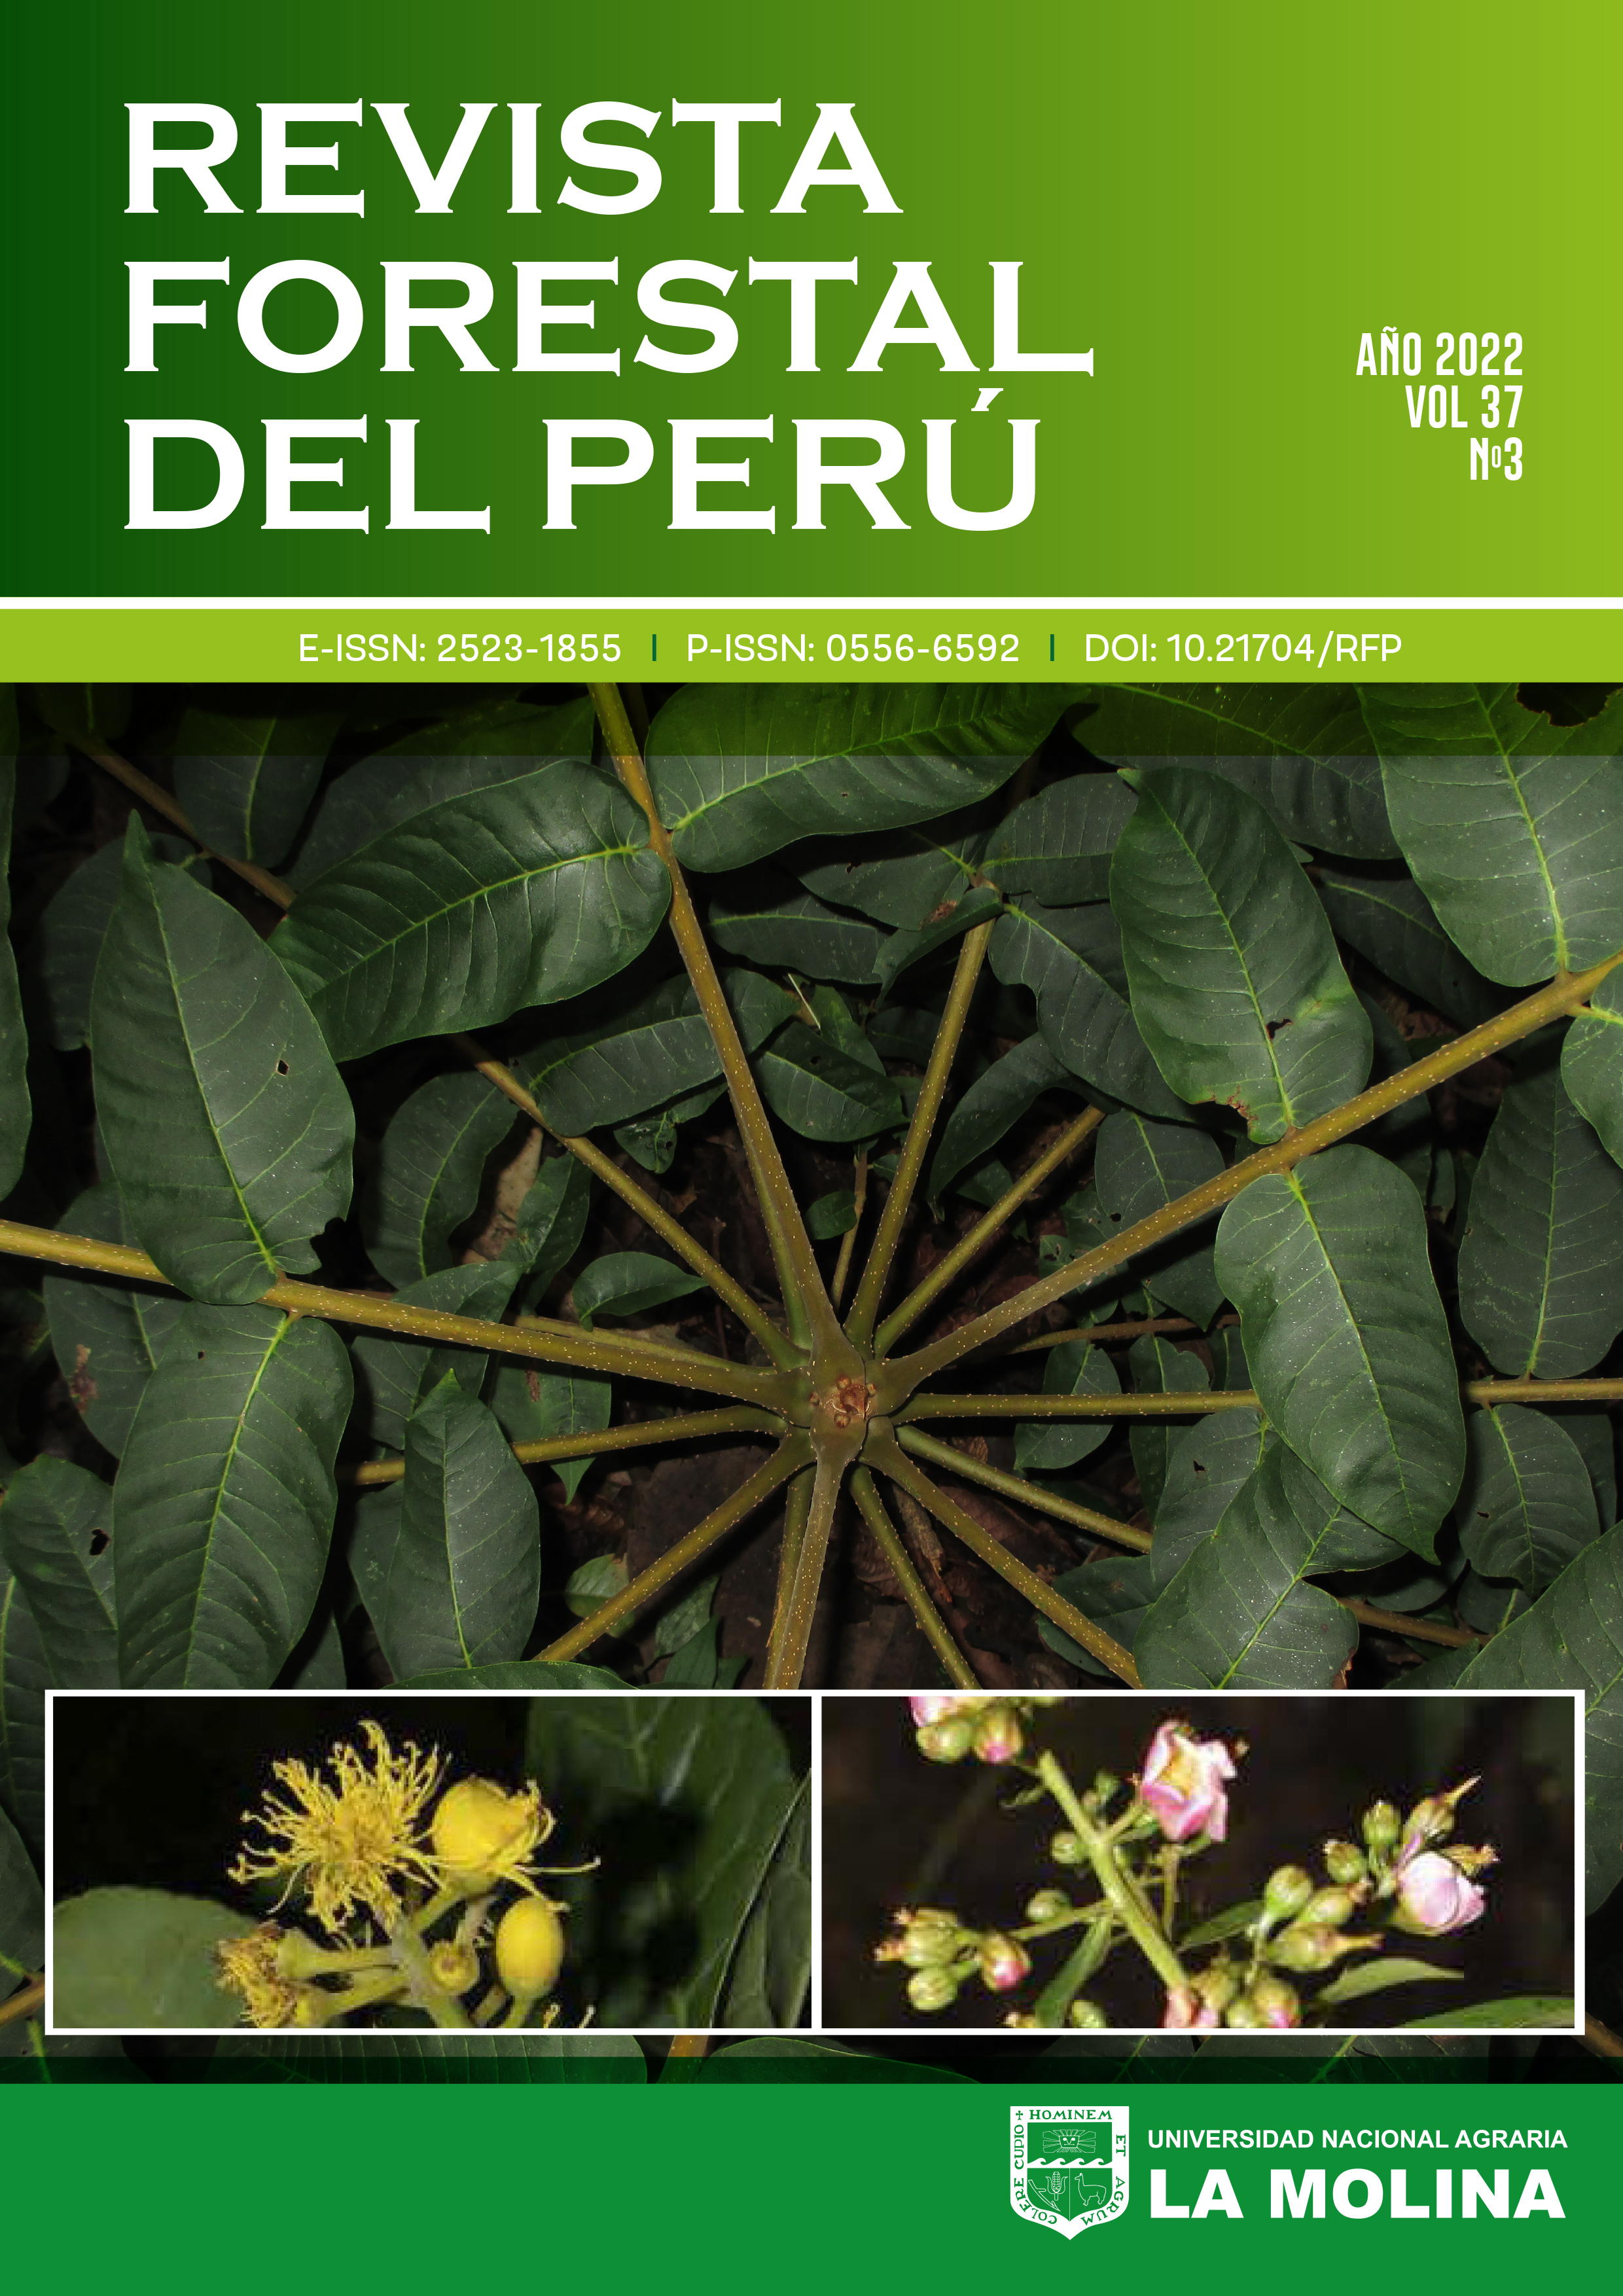 Catalogue of the Timber Forest Species of the Peruvian Amazon.